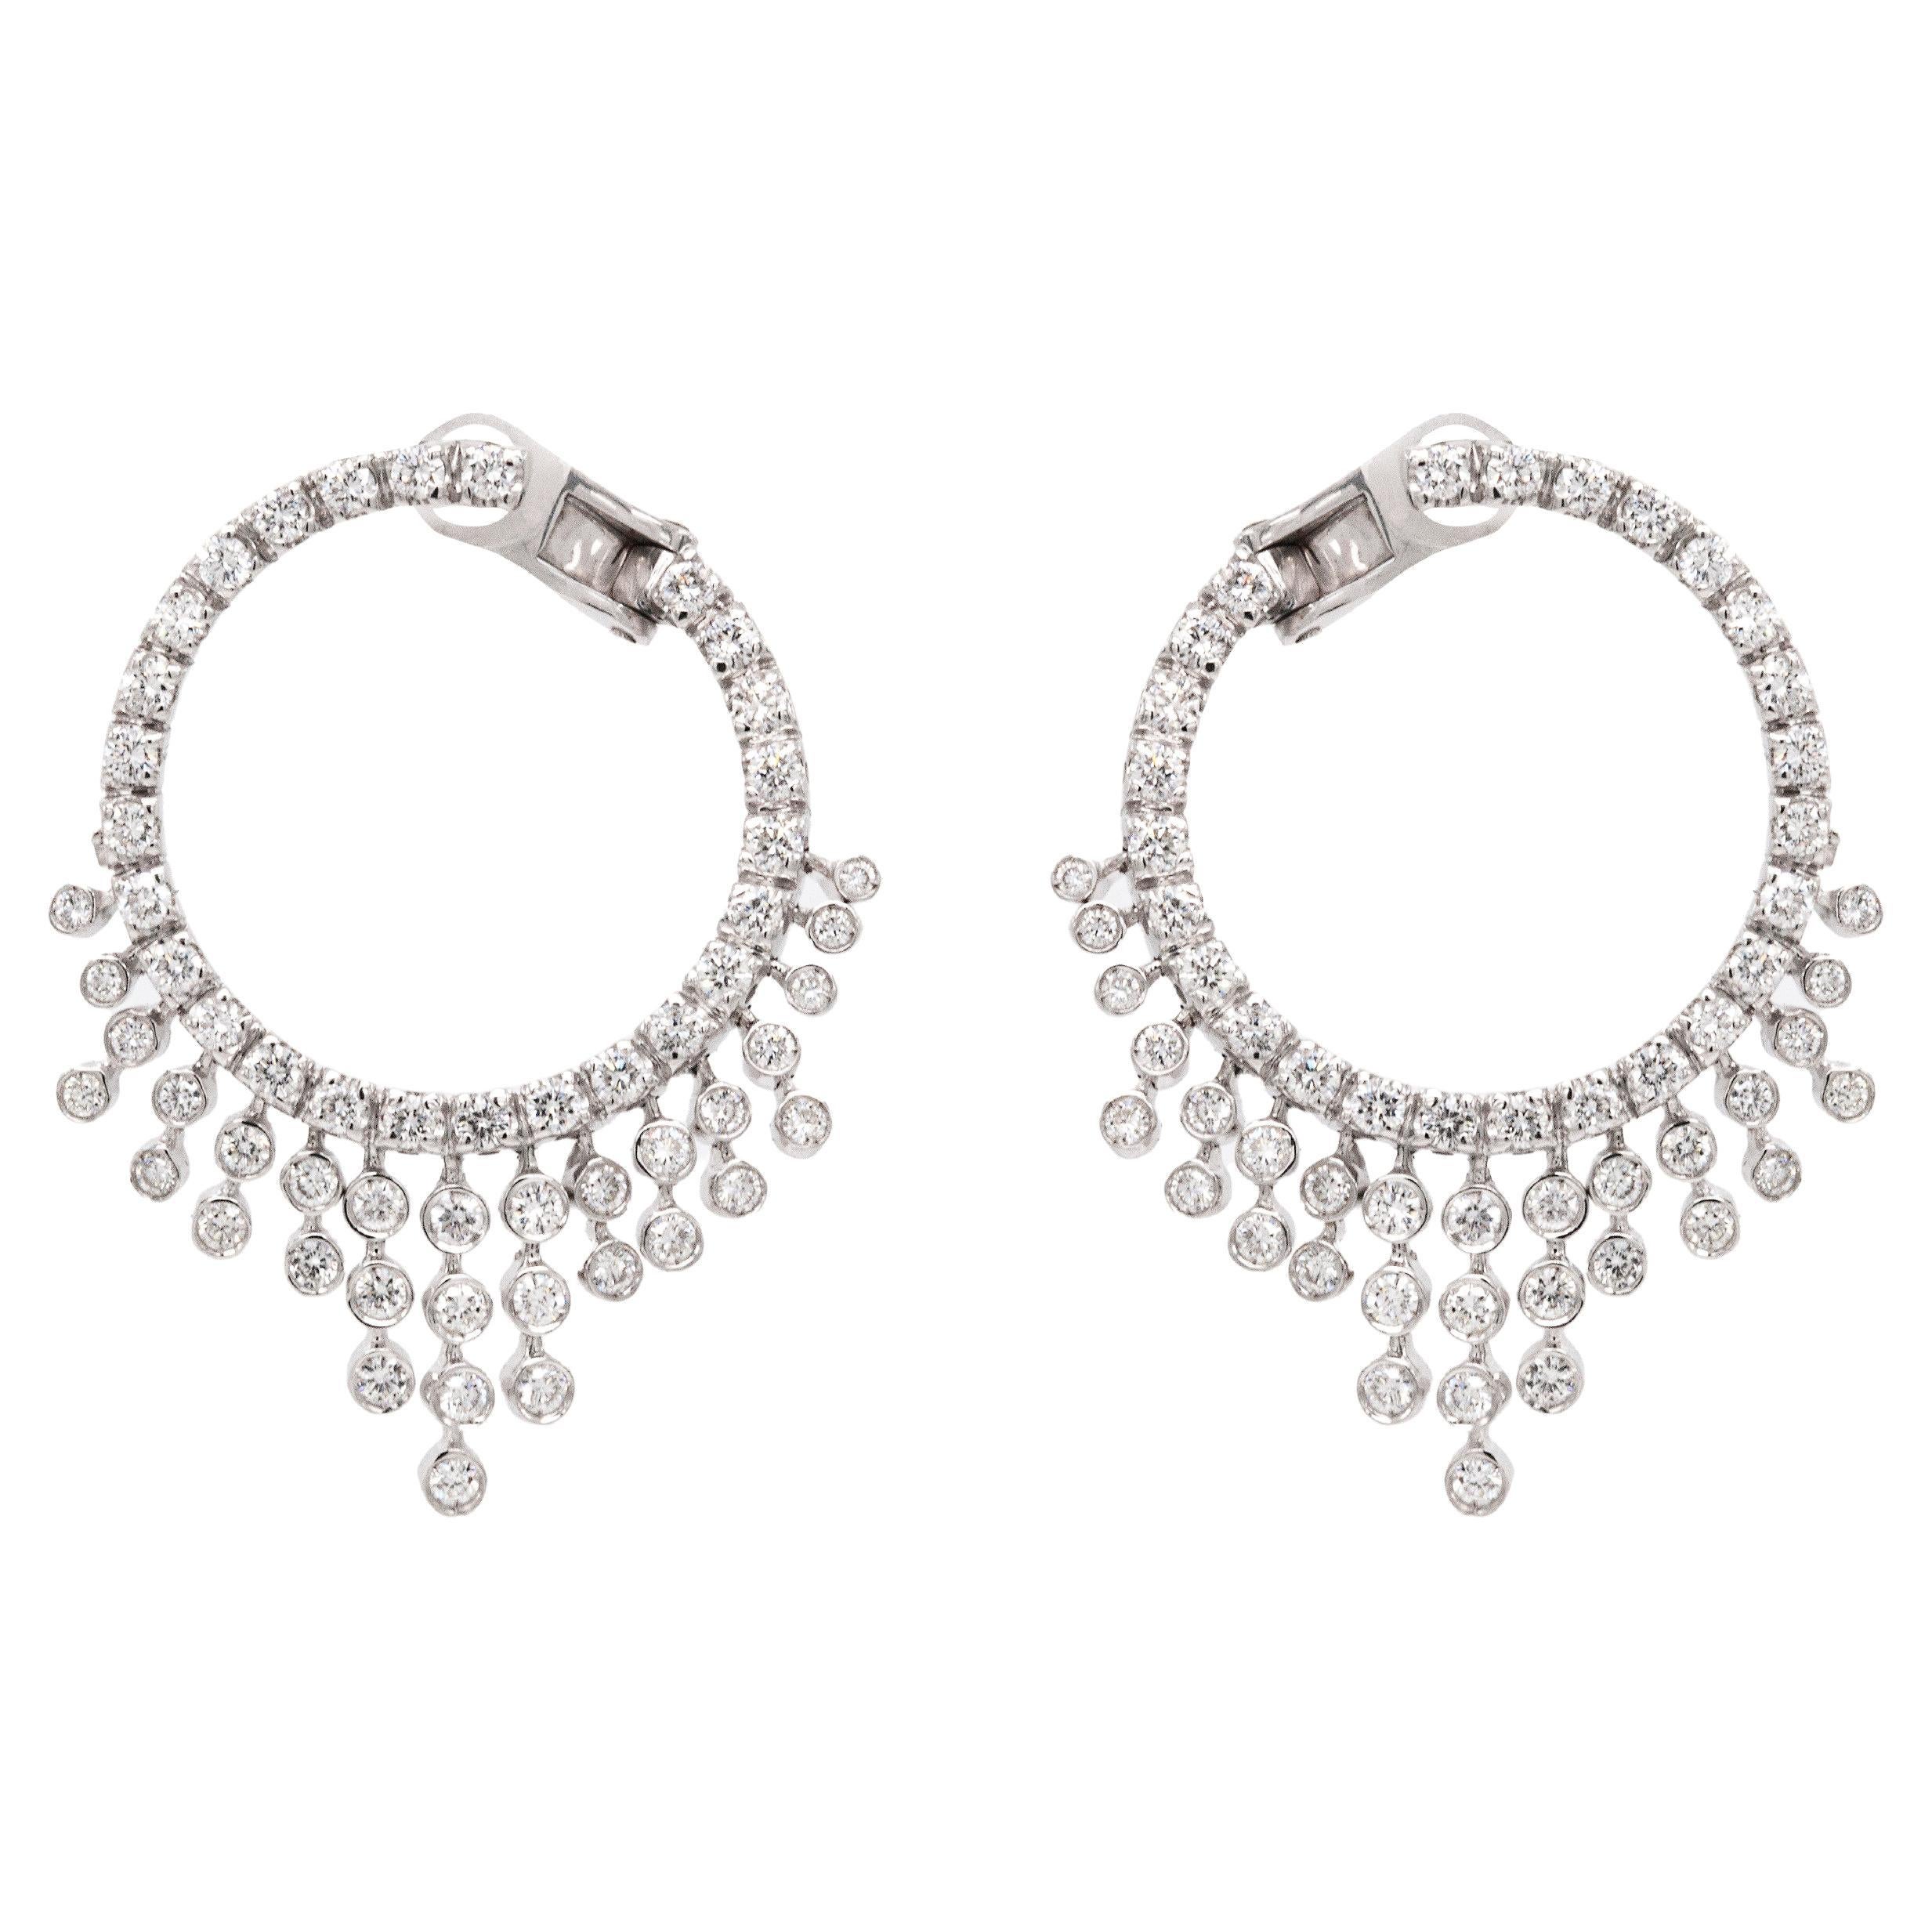 Valente Milano 18ct White Gold and Diamond Chandelier Hoop Earrings For Sale